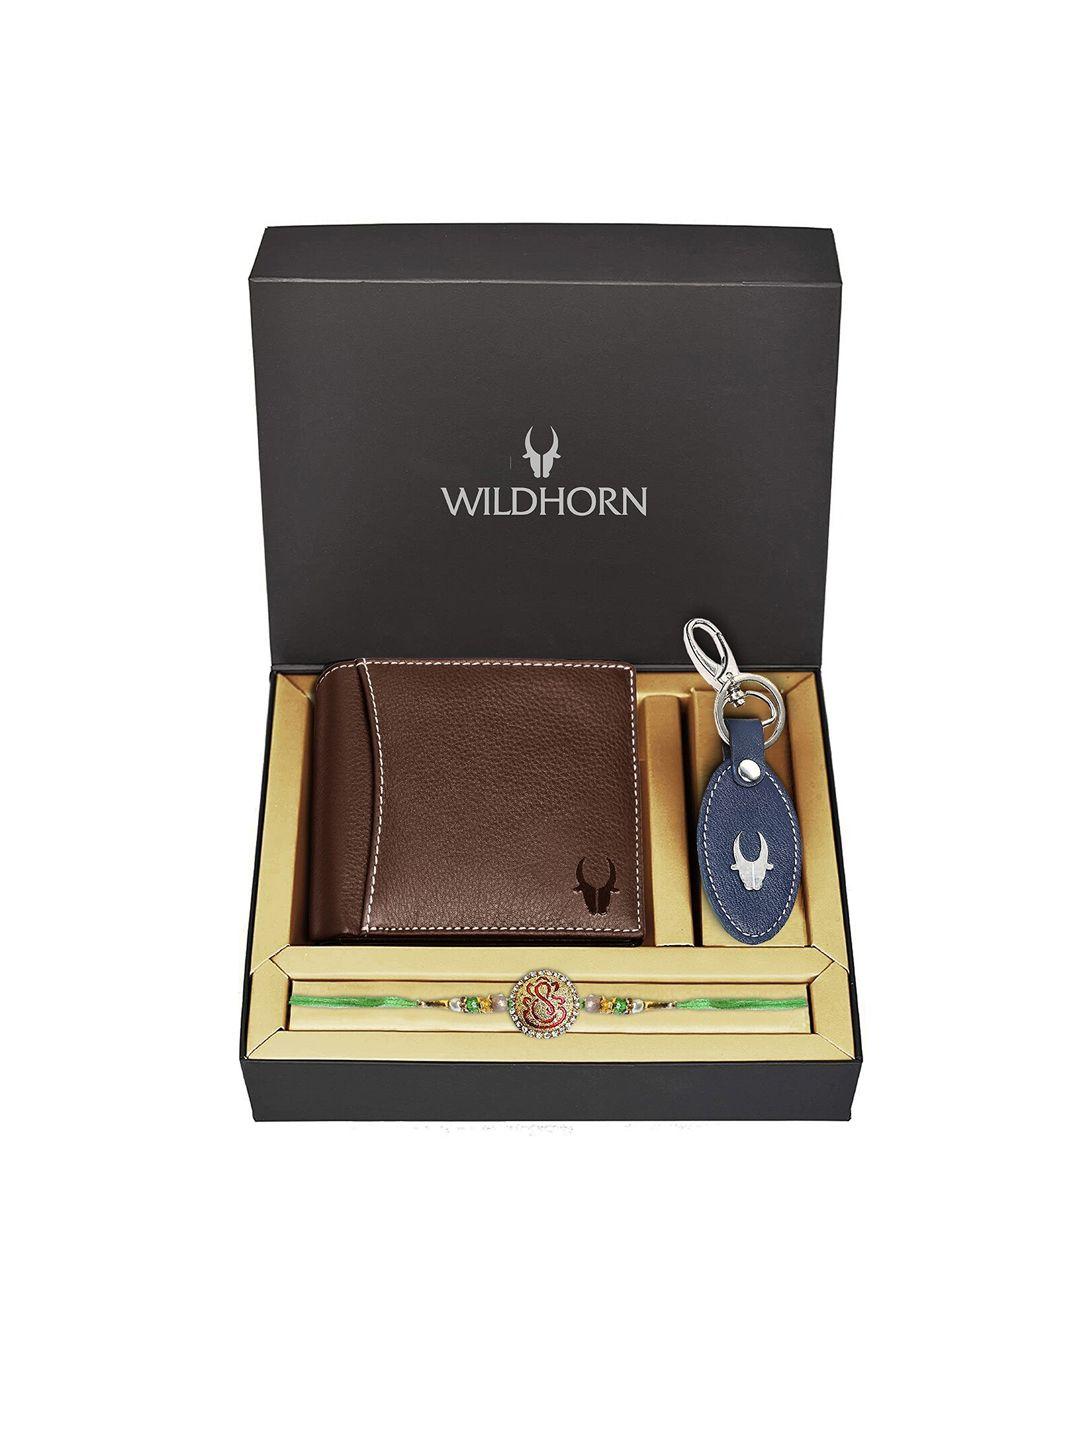 wildhorn brown genuine leather wallet and blue keychain with rakhi combo gift set